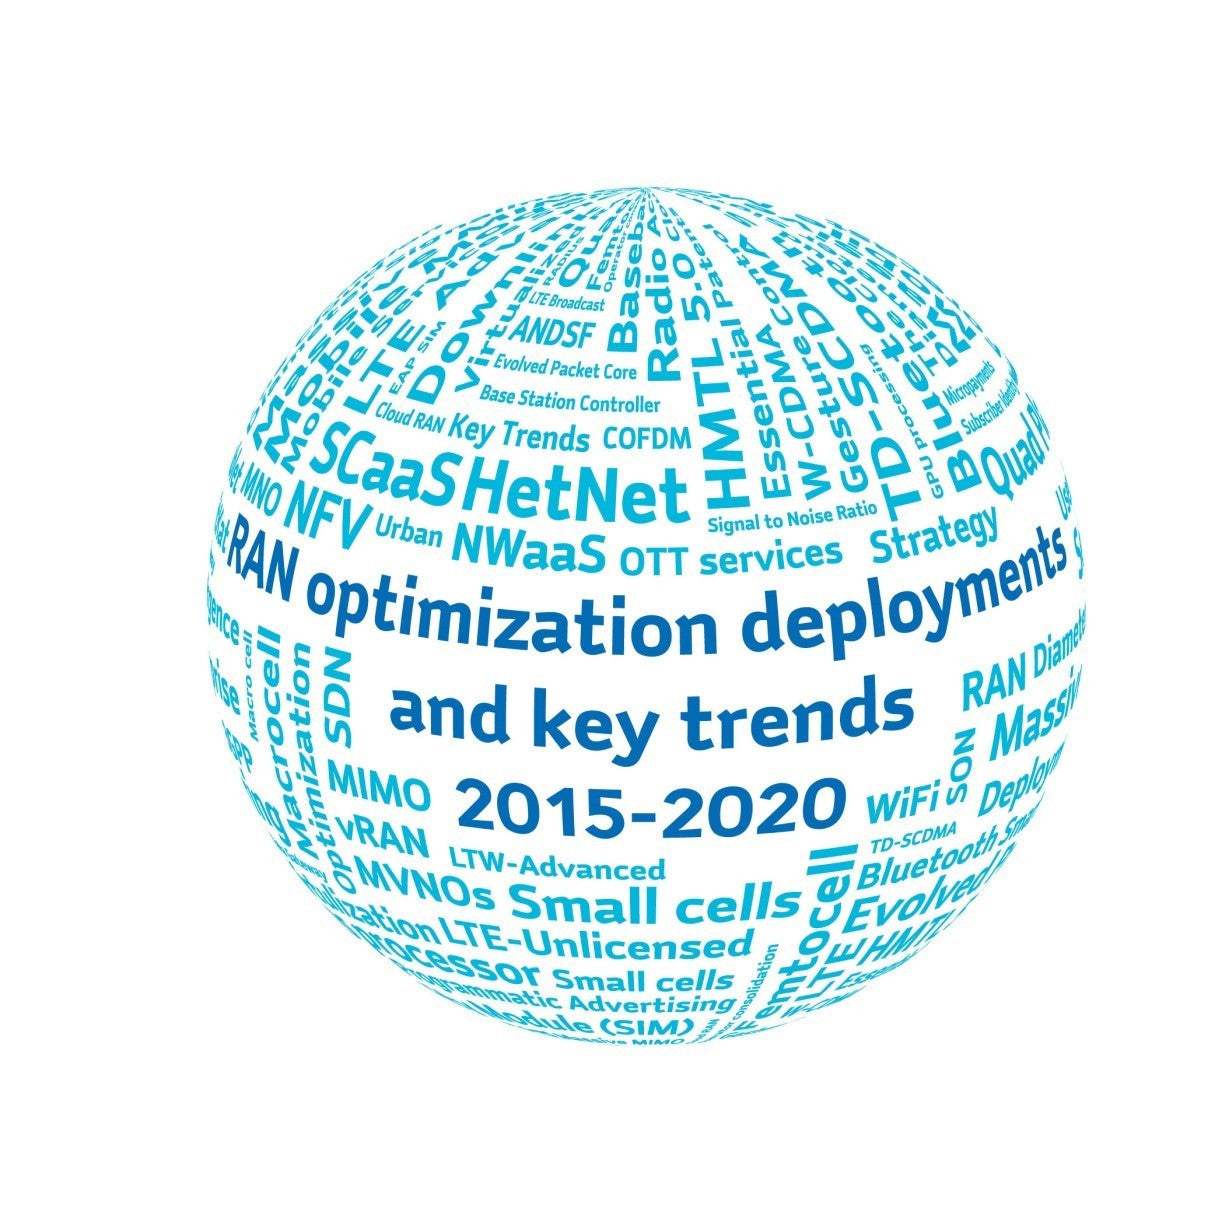 RAN Optimization Deployments and key trends including VoLTE 2015 to 2020